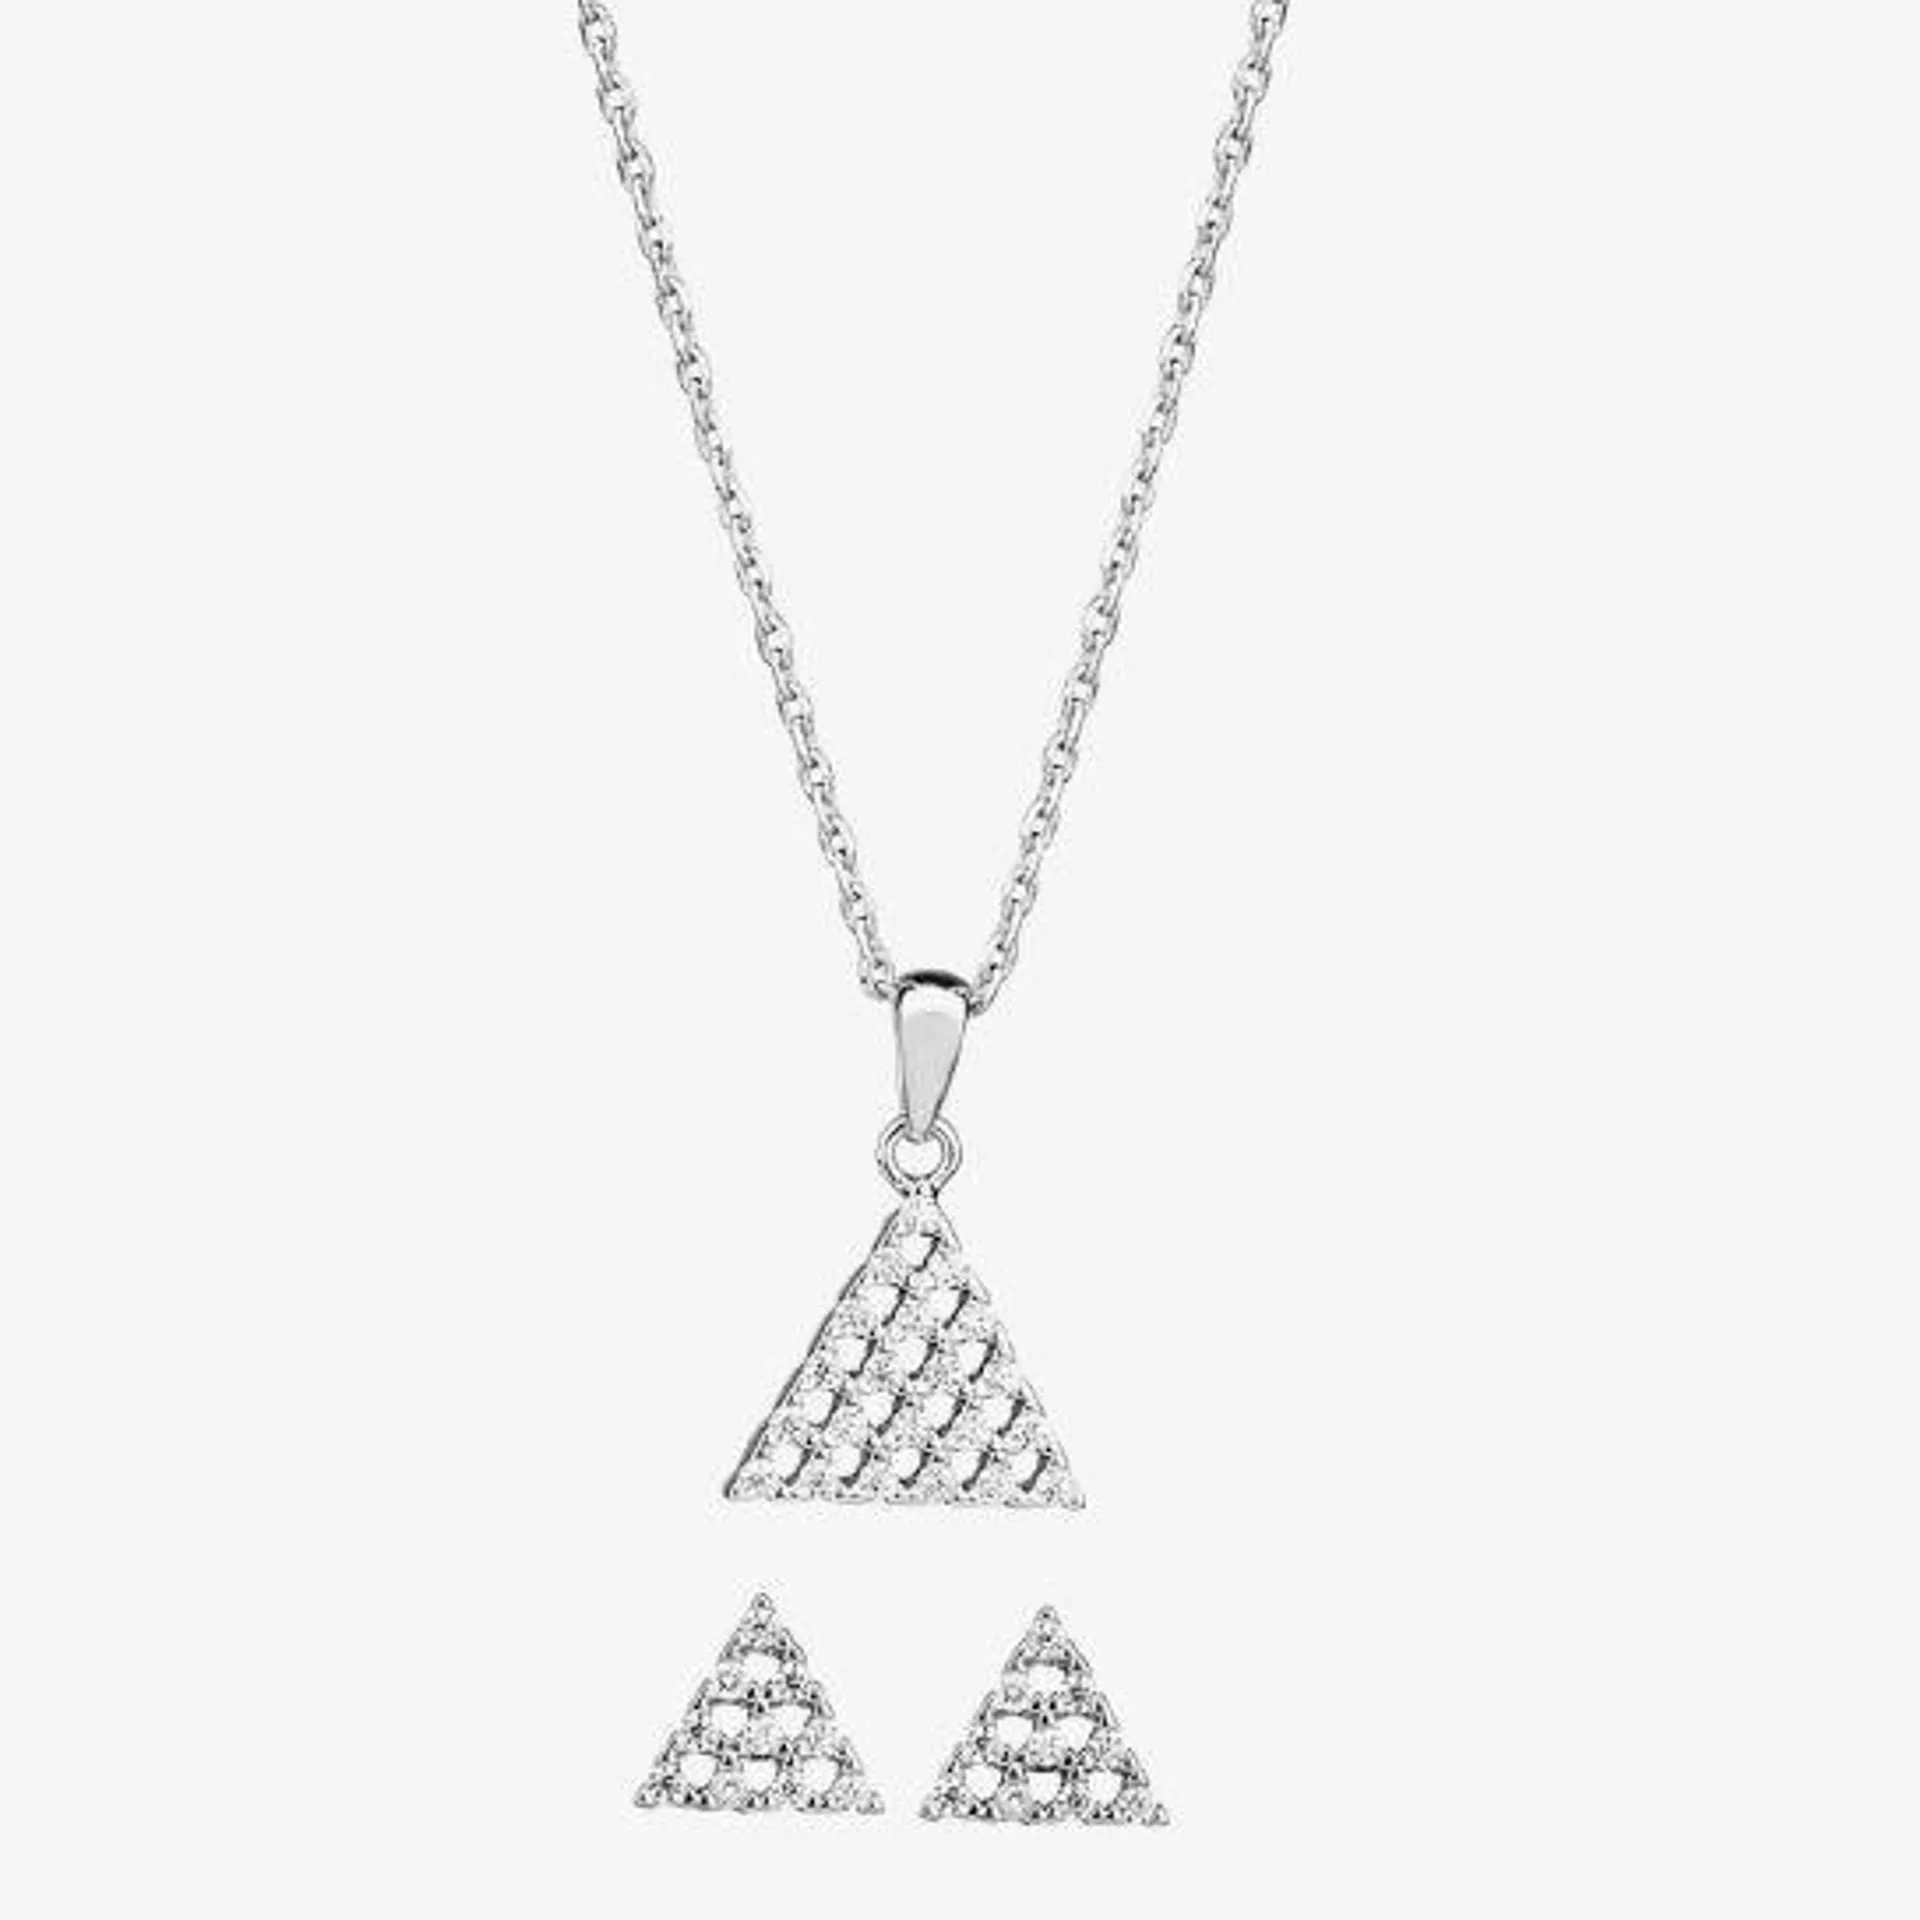 Silver Pave Triangular Pendant and Earring Set SET11985